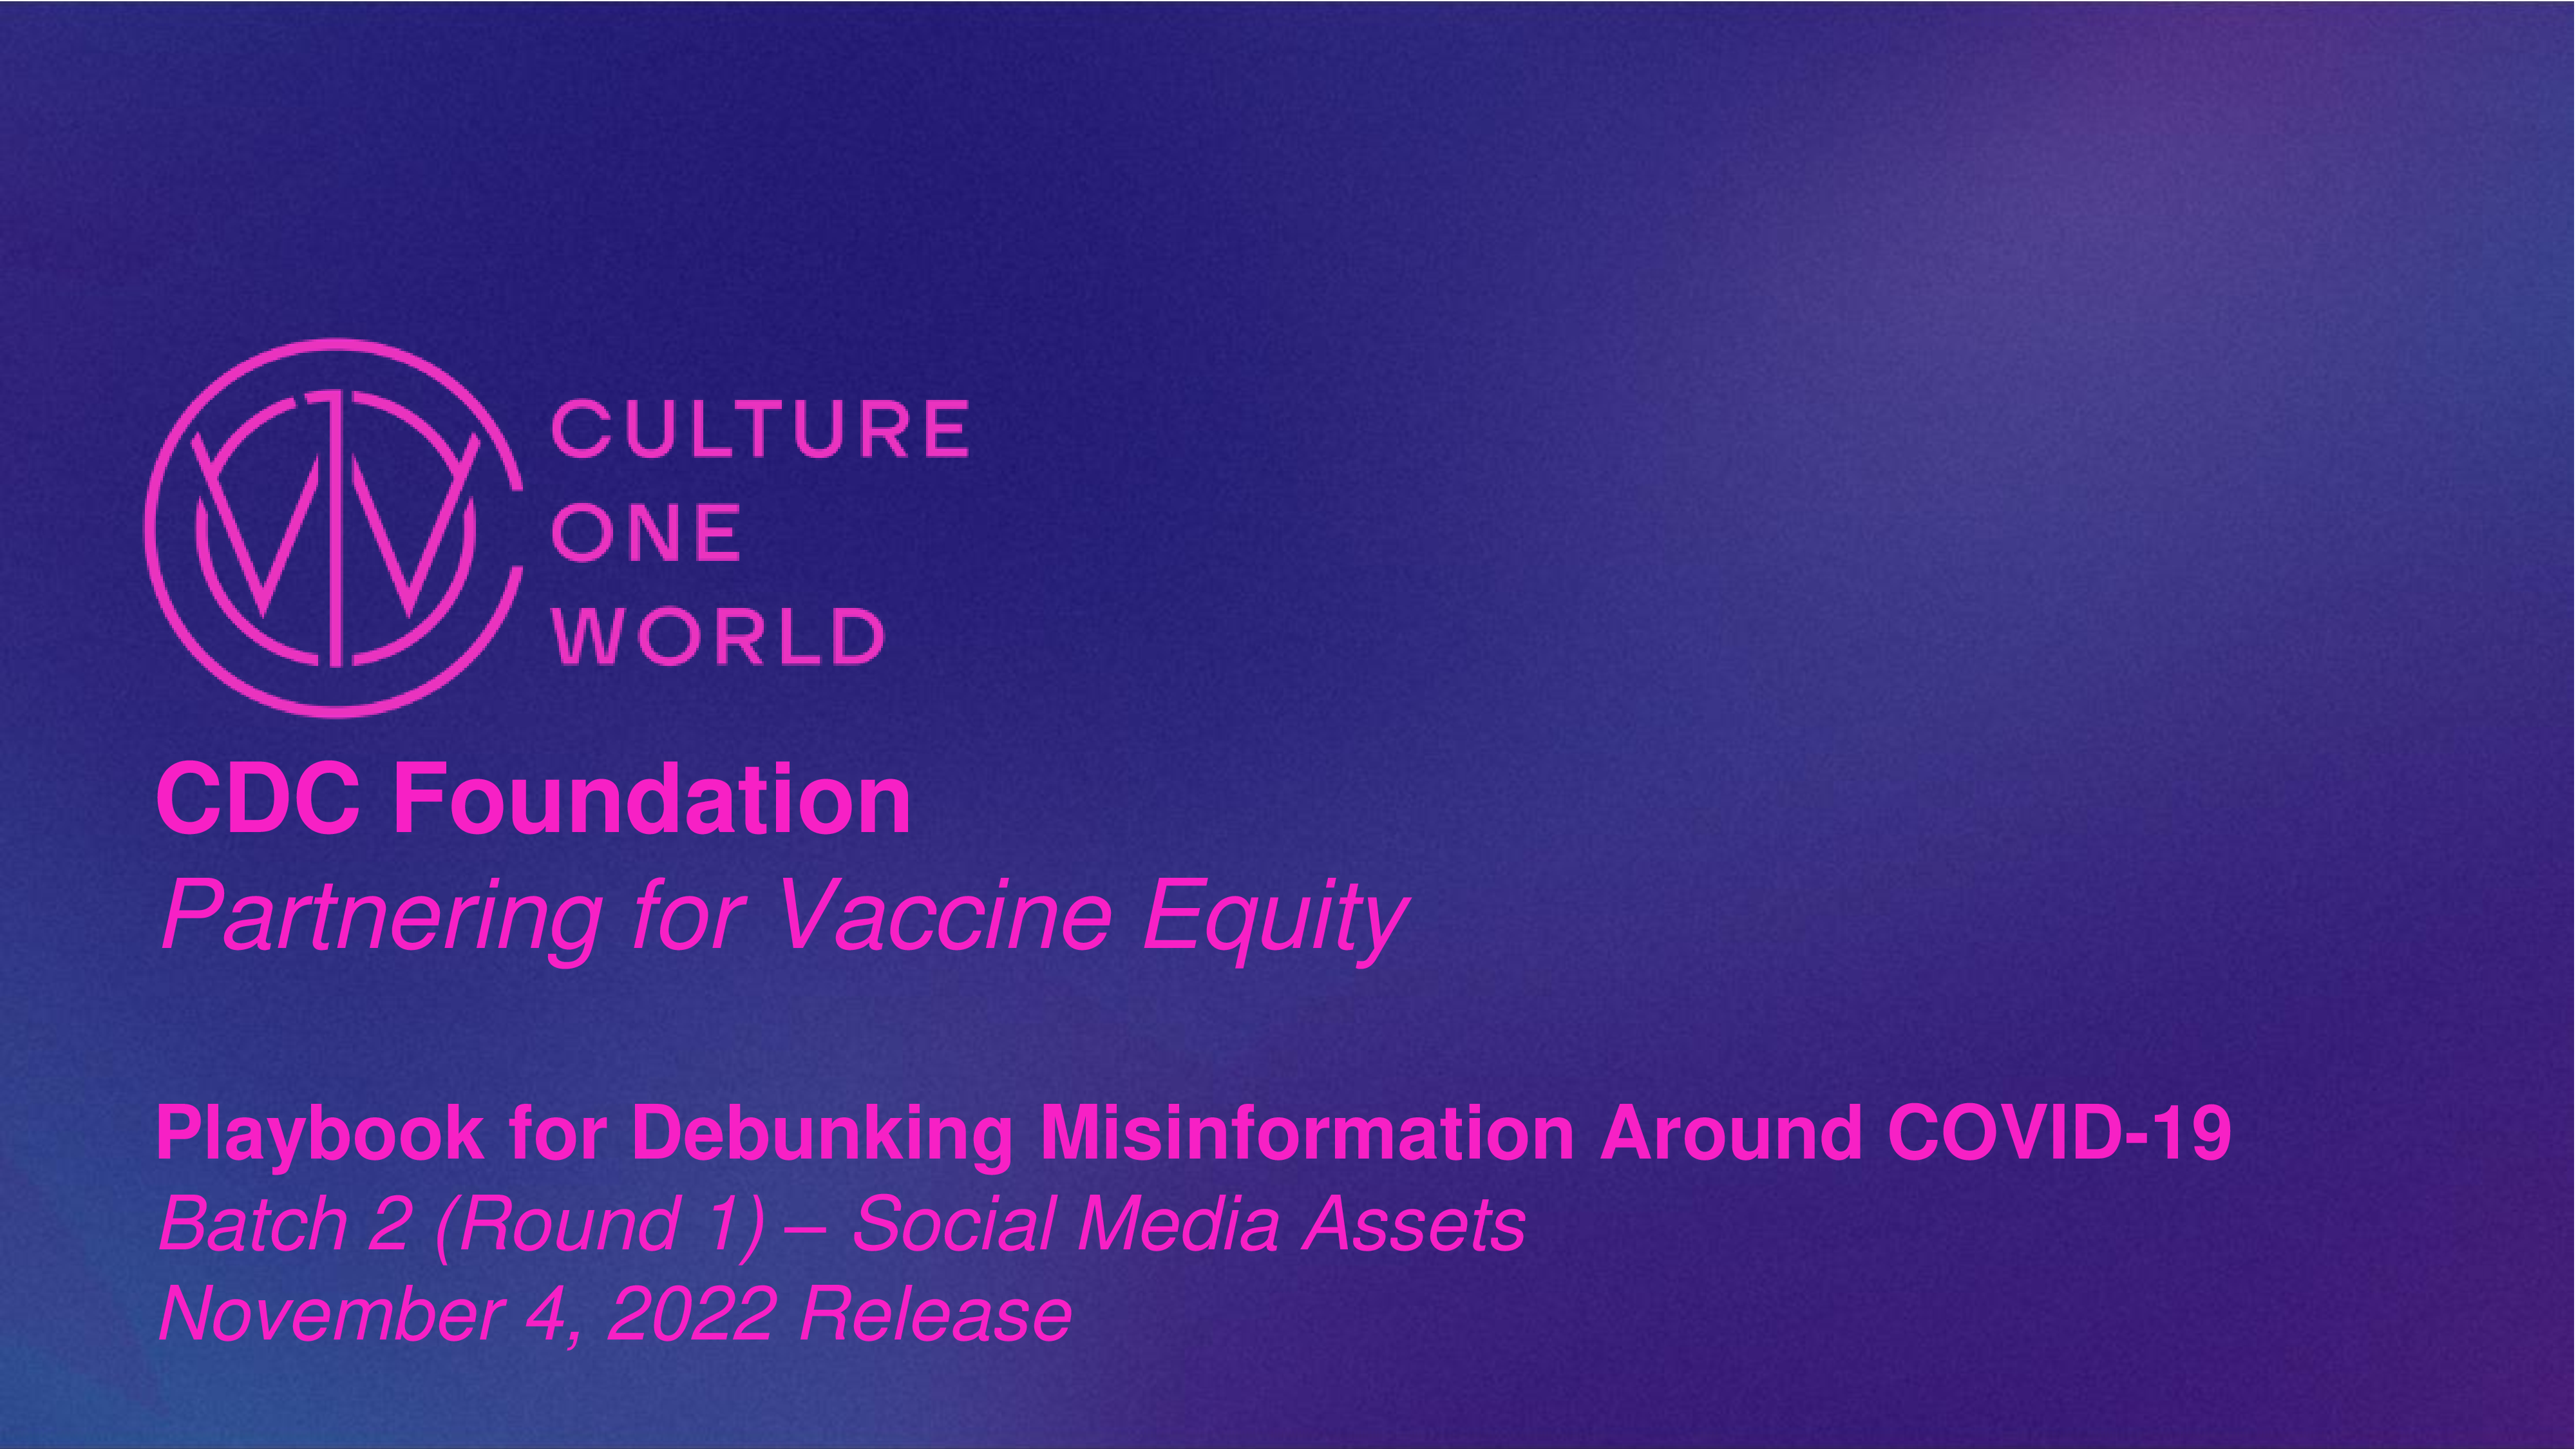 First page of the playbook with pink text against a purple background. The Culture One World logo is at the top left corner.